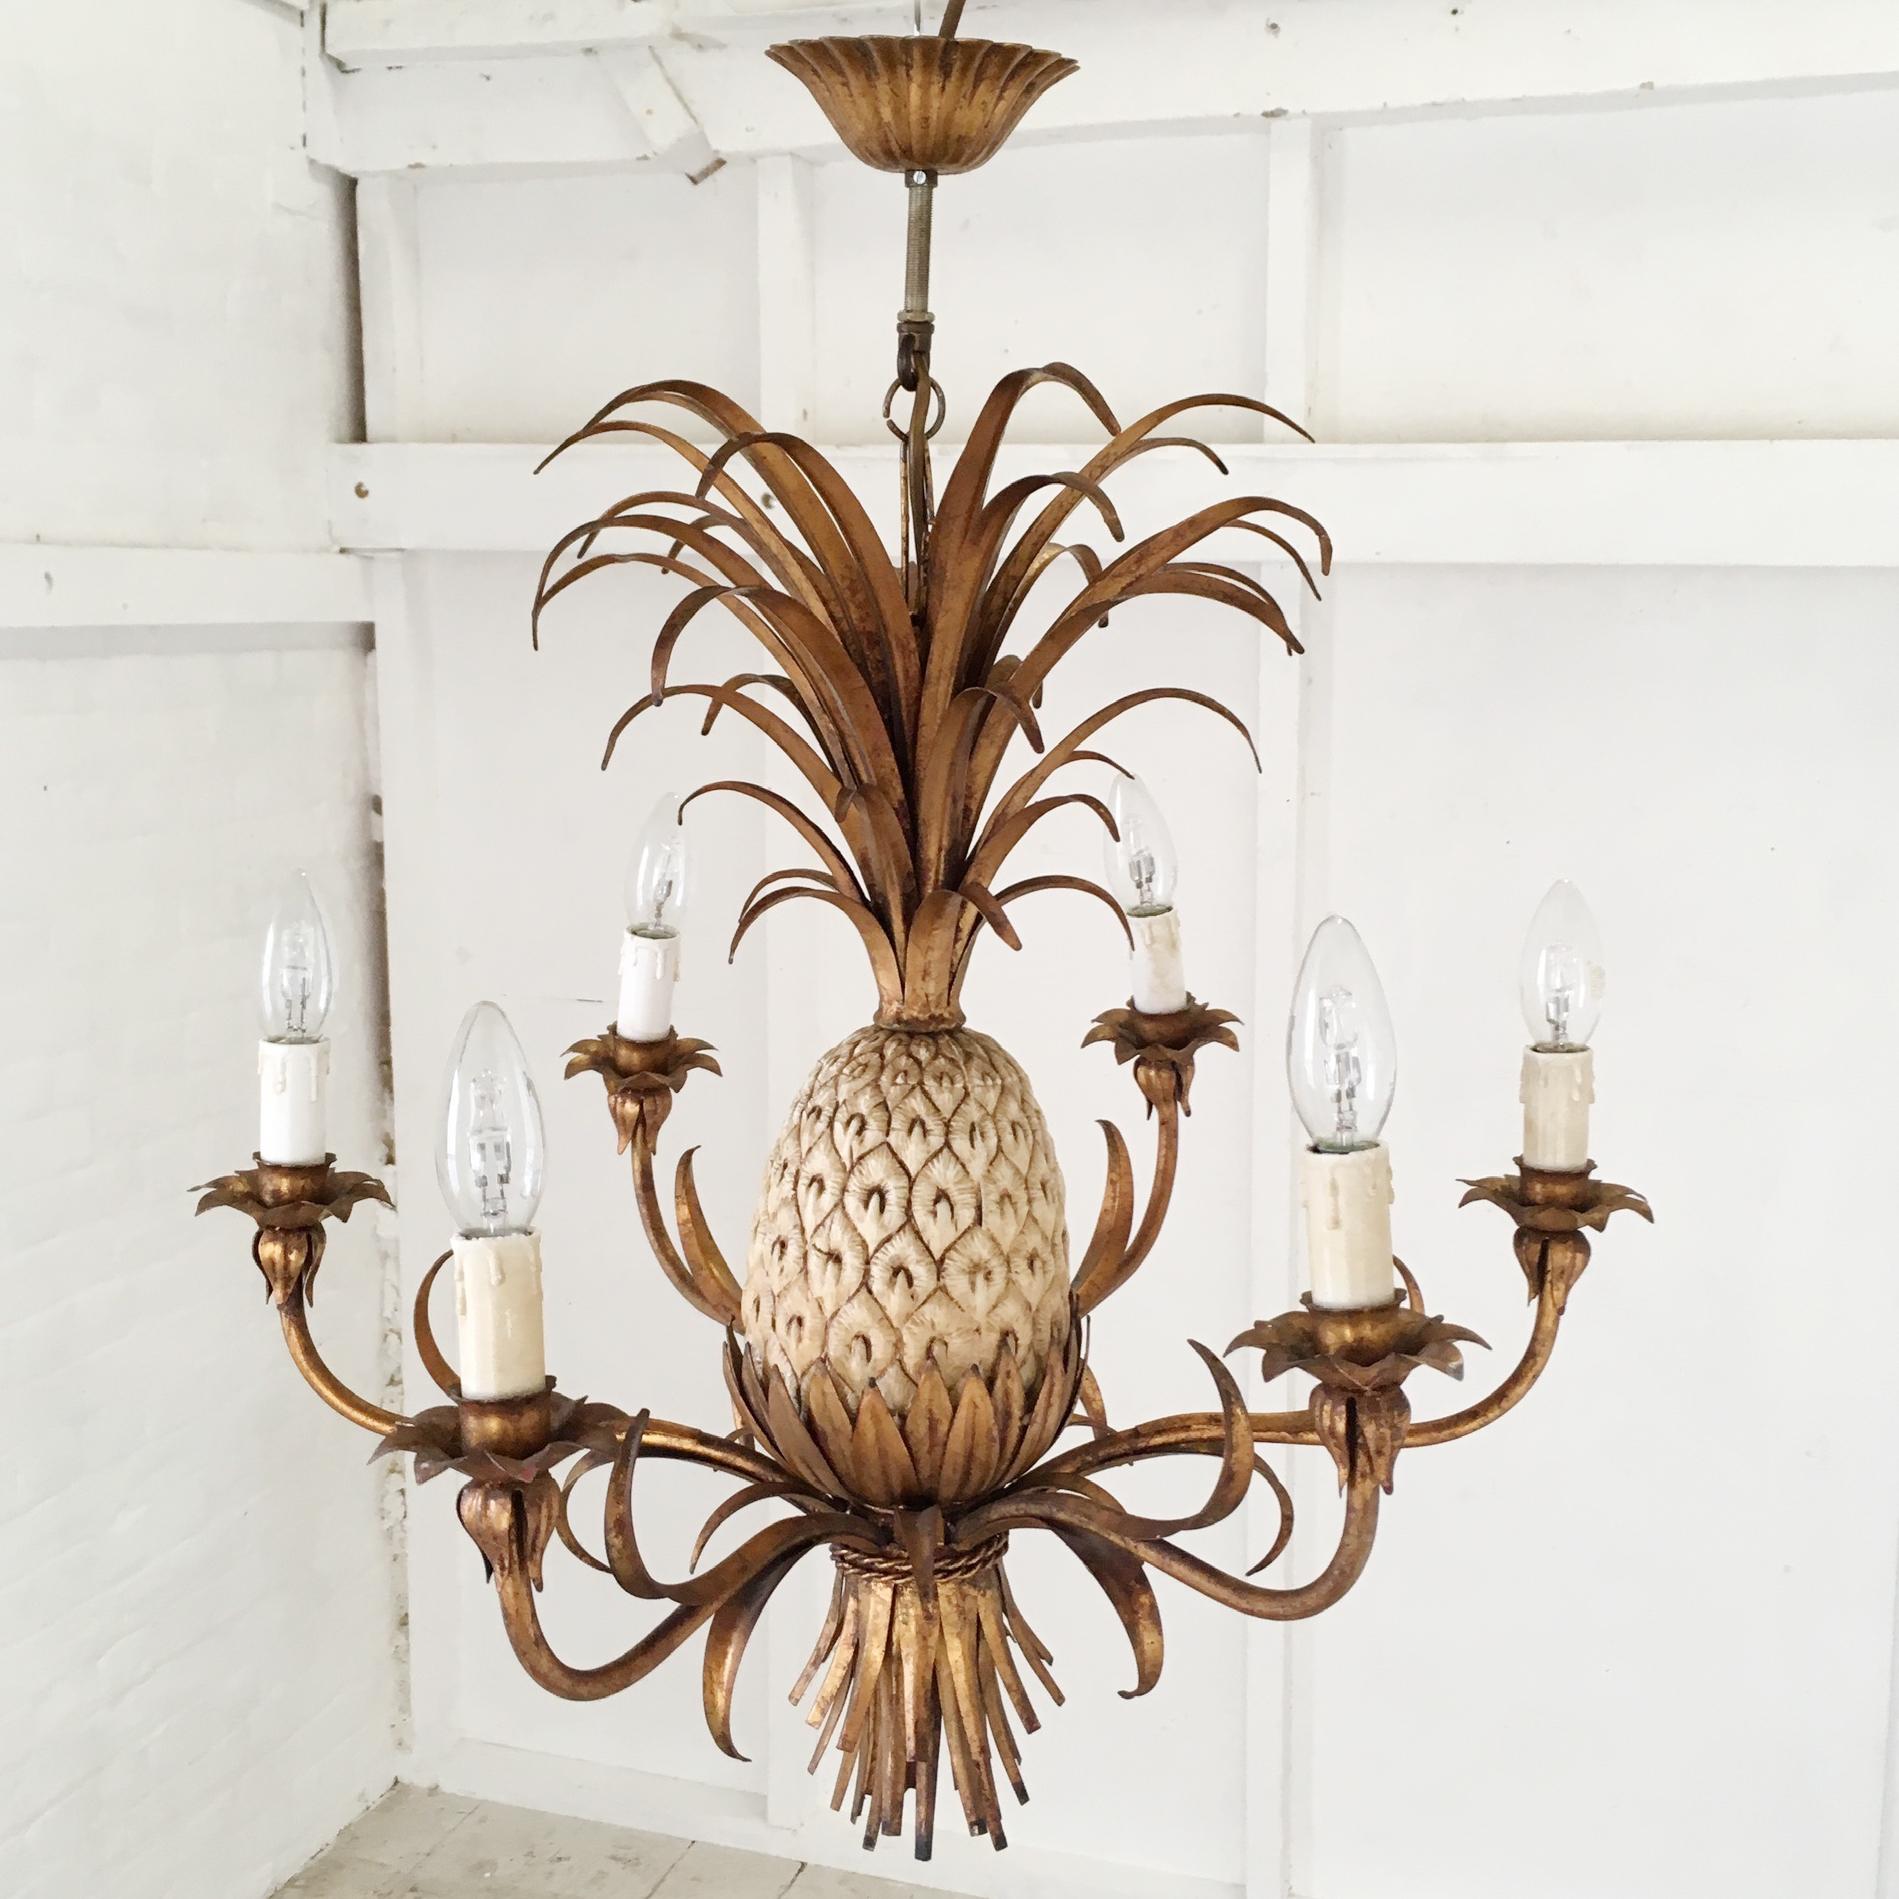 Stunning gilt tole chandelier with pineapple centre piece
Italian origin,
circa 1950s-1960s.
The central pineapple is metal and in cream color with highlights
The fronts are large and full
The light has six bulb holders
It is a large, beautifully